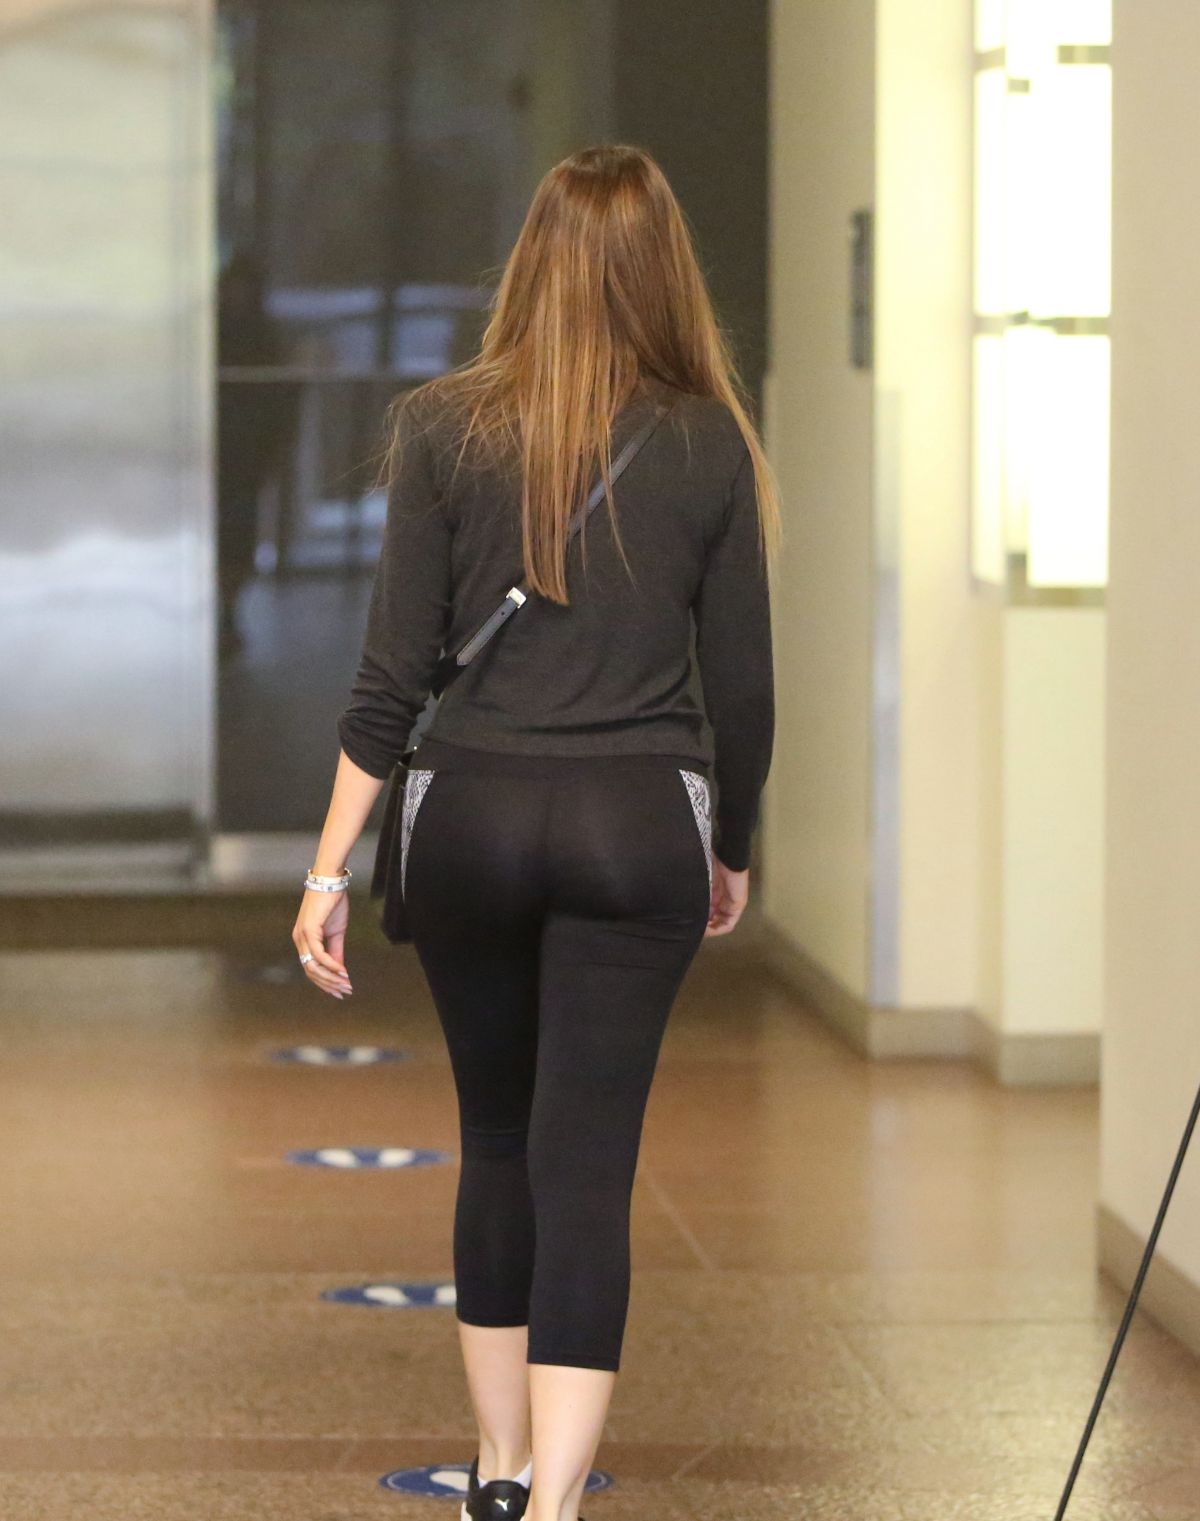 Sofia Vergara in Tights Out and About in Los Angeles 2020/10/22 3